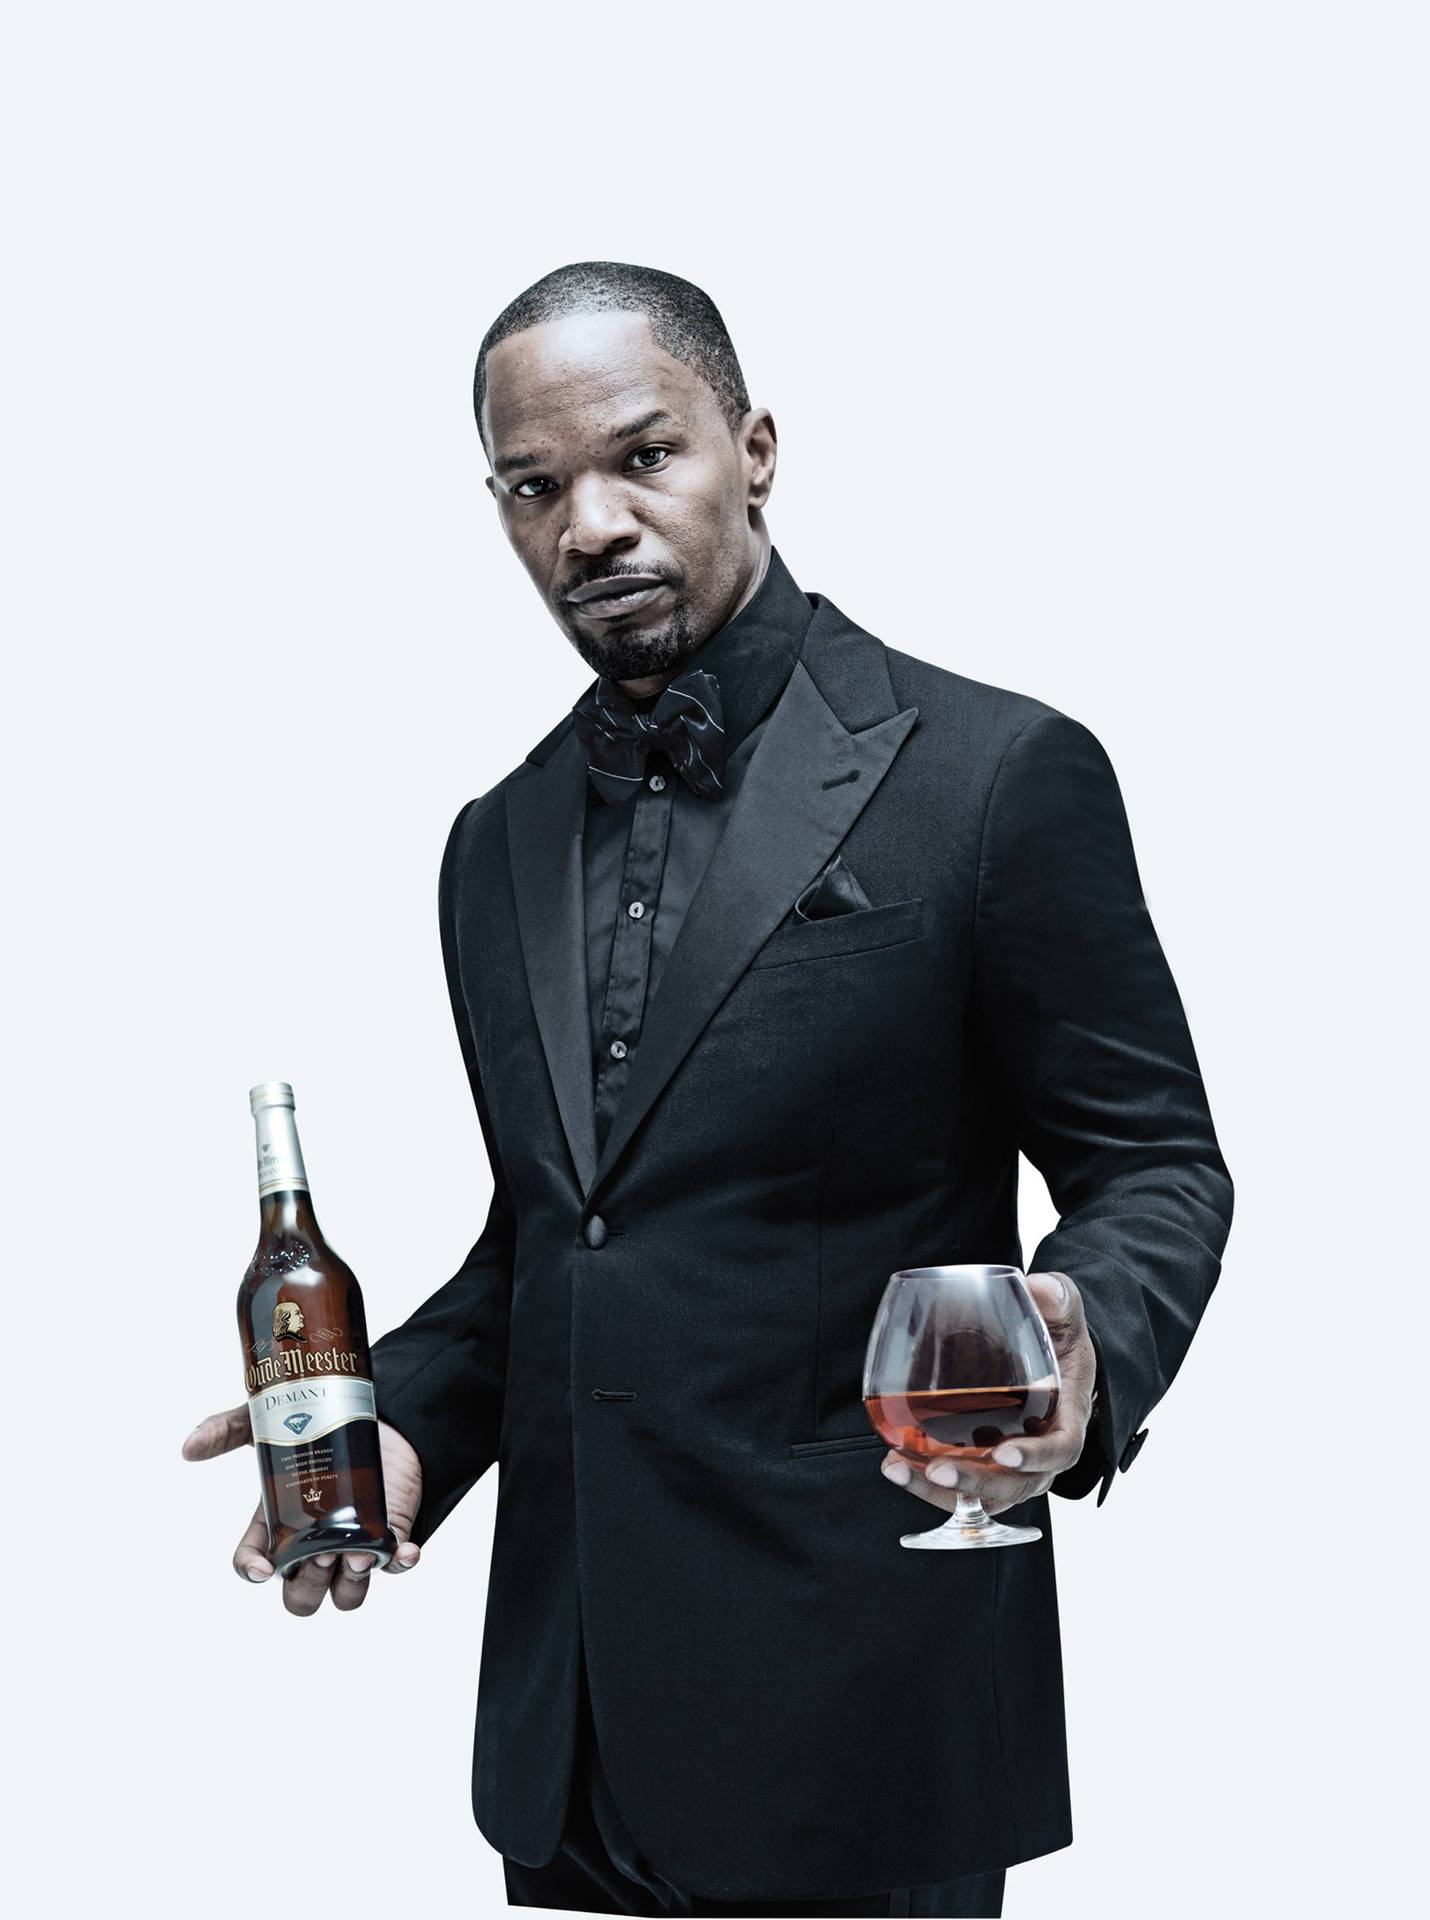 Jamie Foxx Keeping Up With The Latest Trends While Representing Oude Meester Background